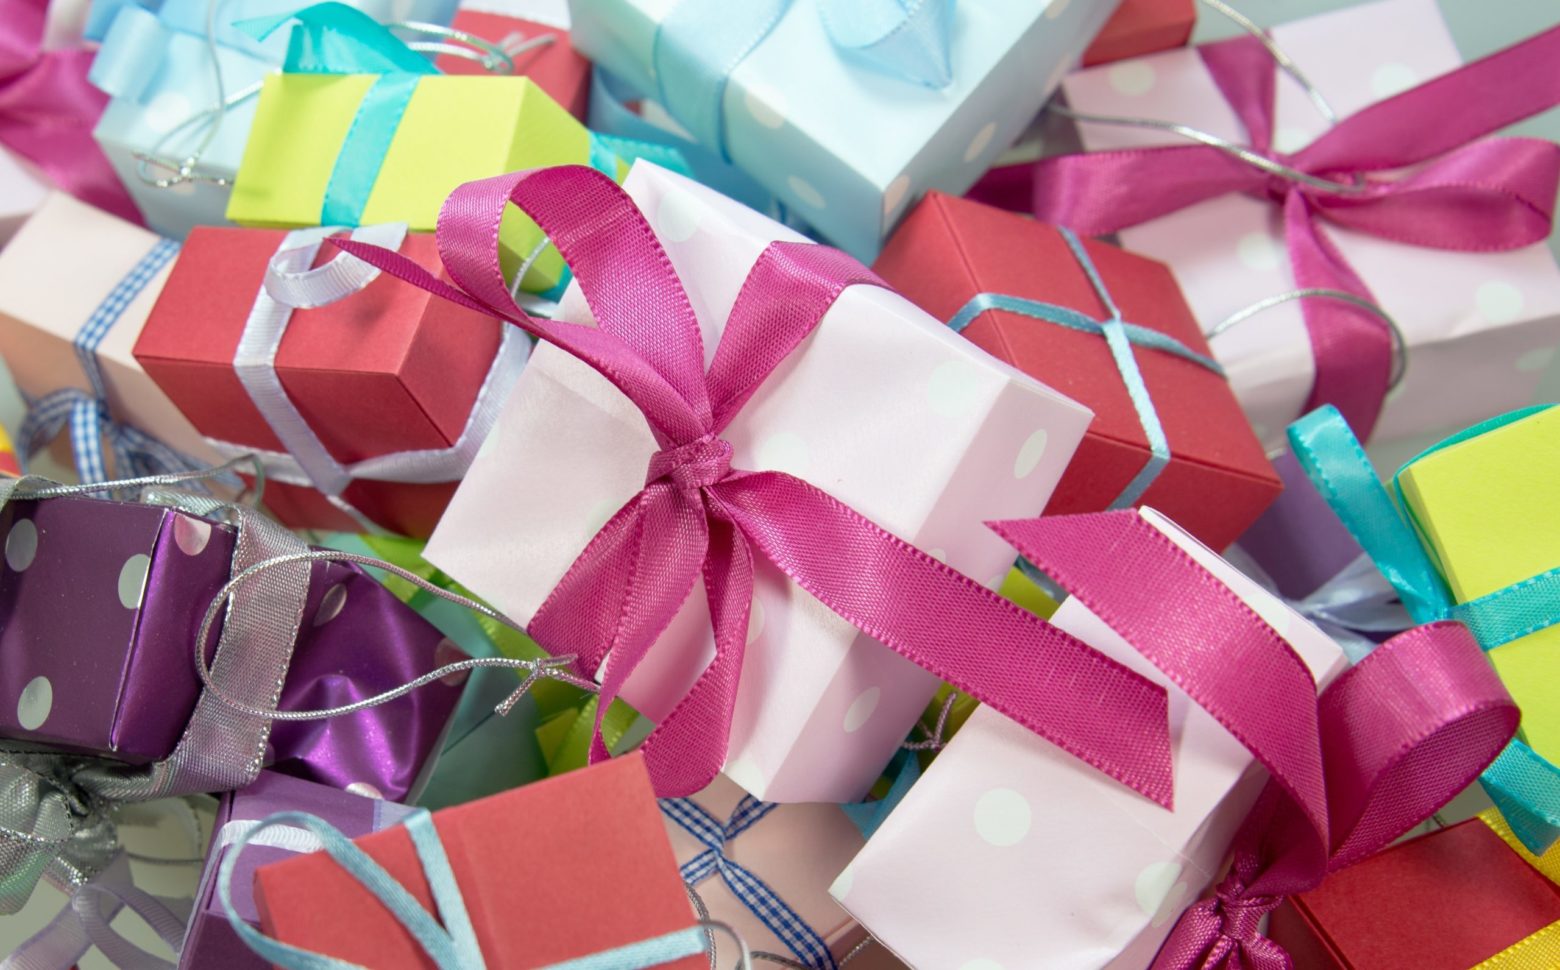 Free Beauty Products! 15 Brands That Give Free Birthday Gifts